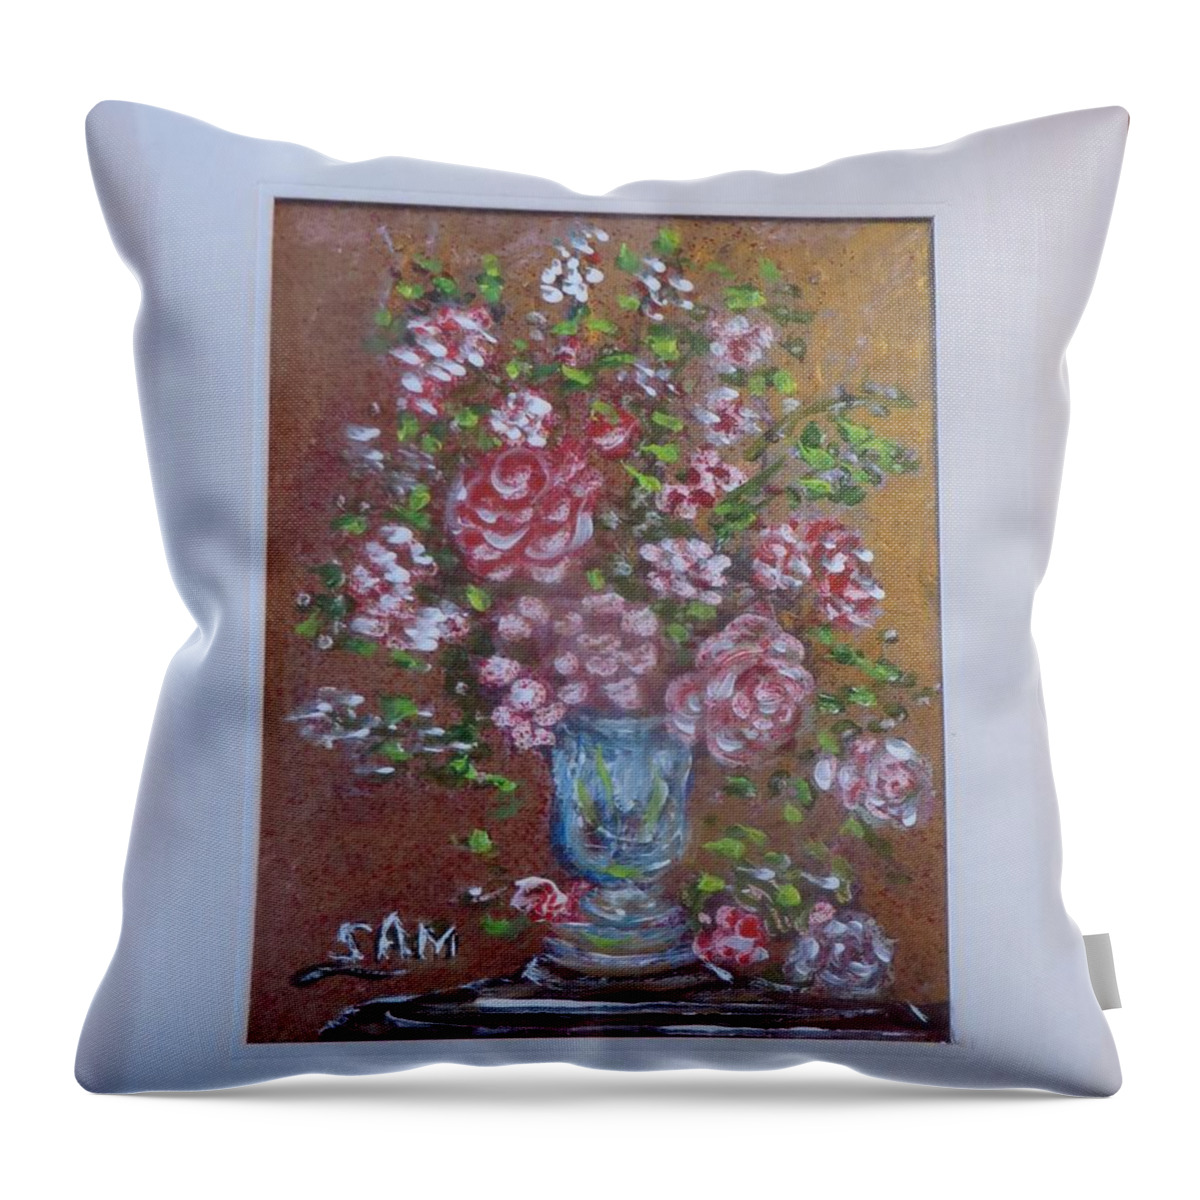 Blue Throw Pillow featuring the painting Velvet 2 by Sam Shaker